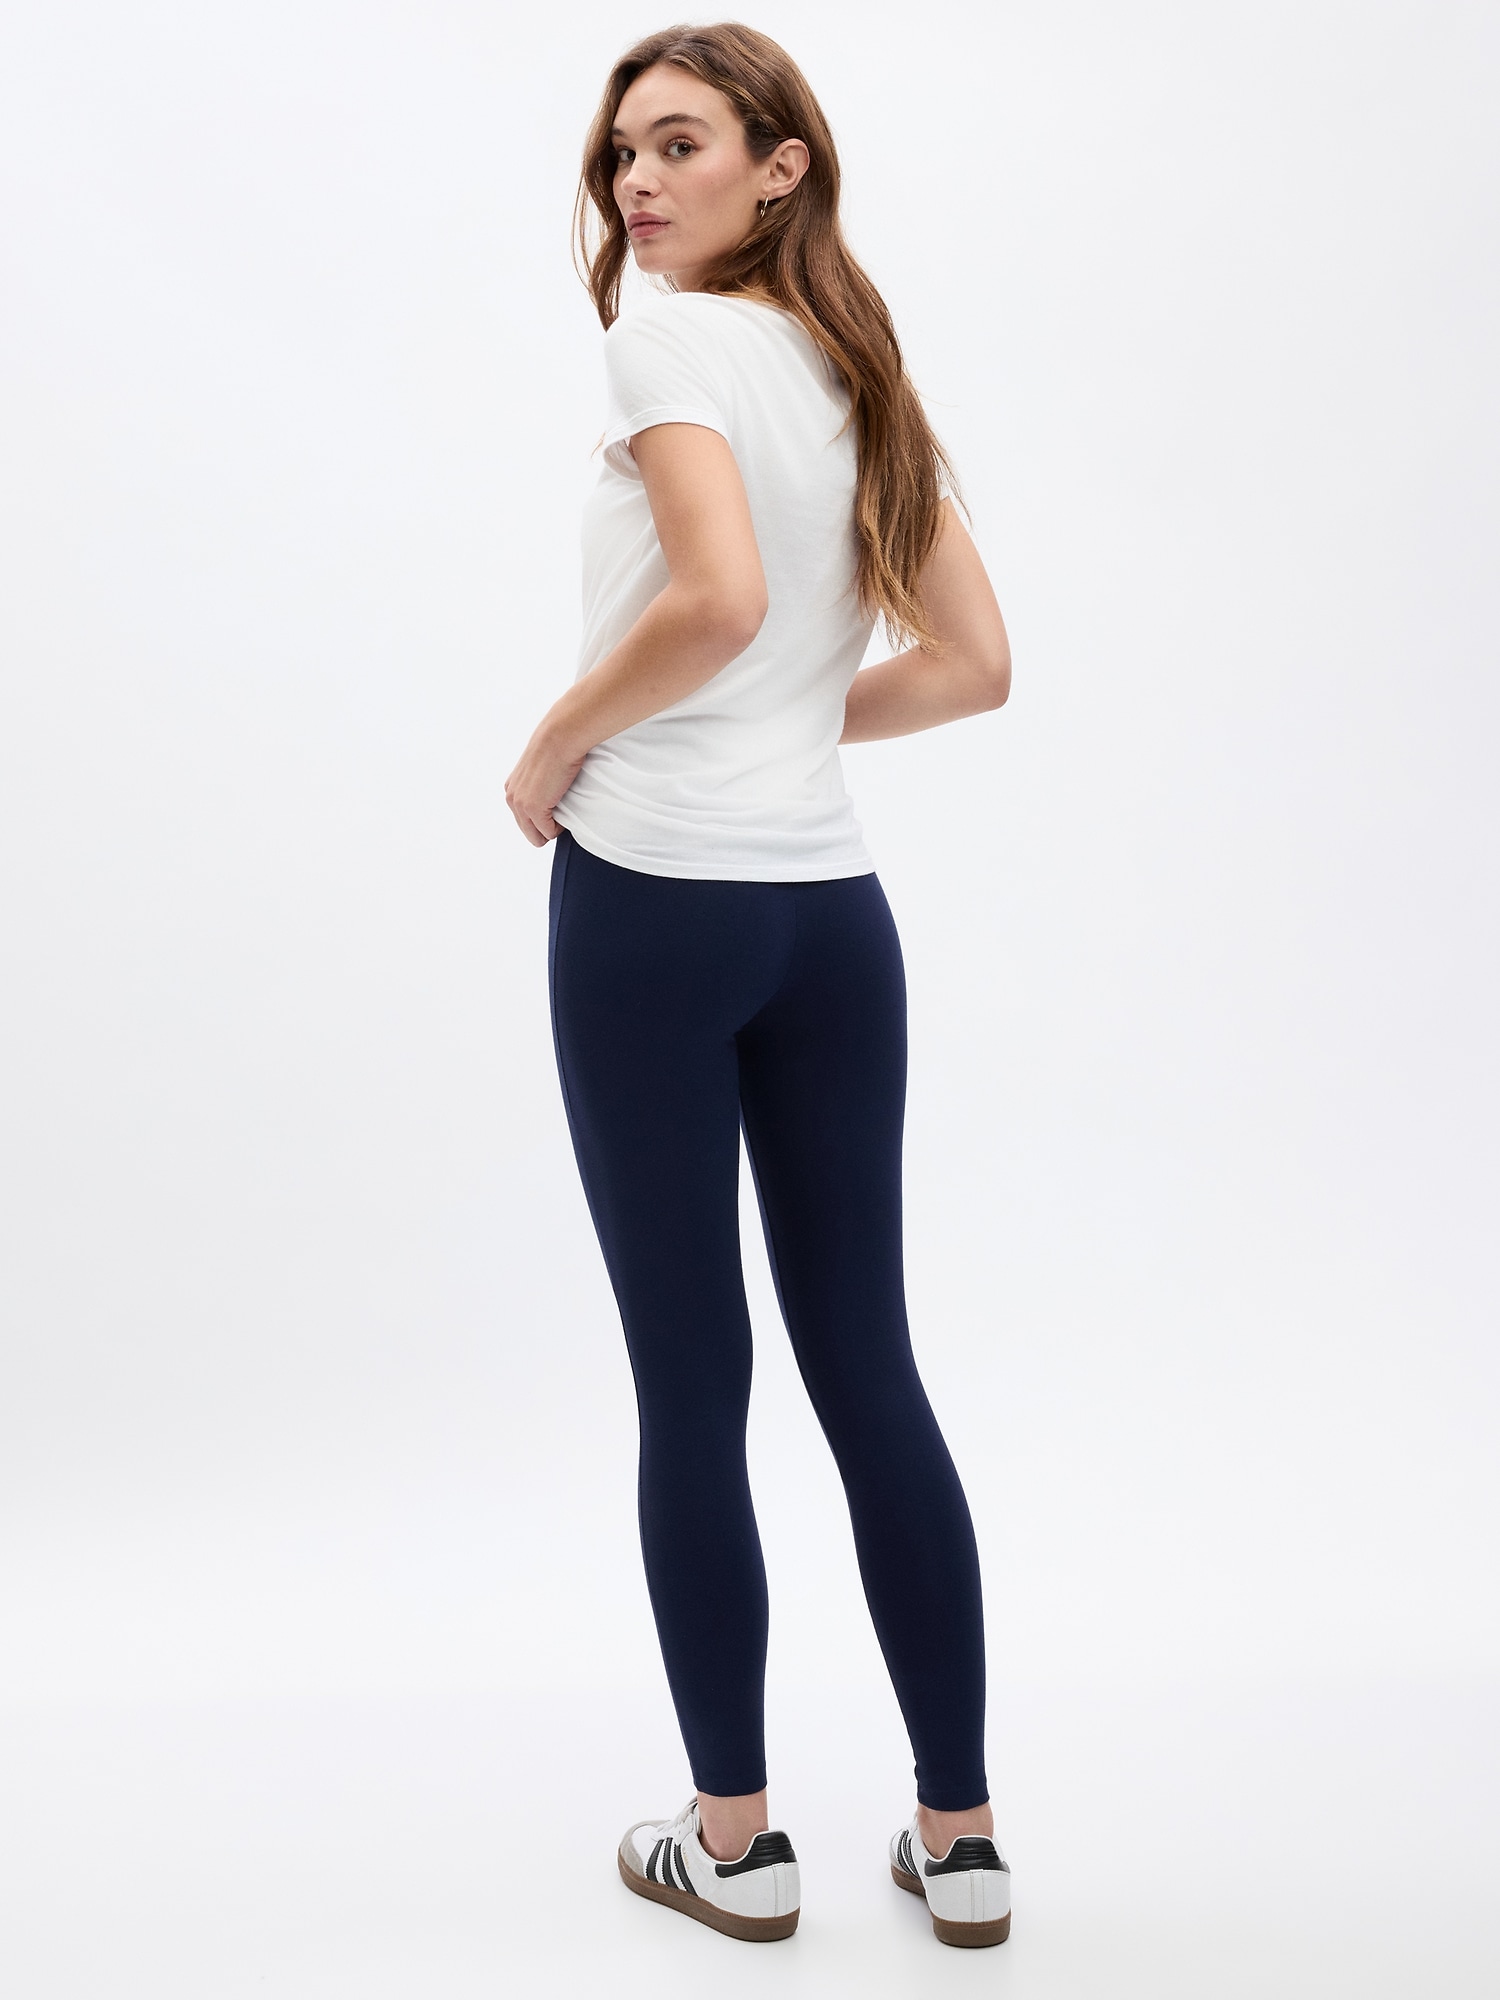 GOOD AMERICAN Stretch leggings | THE OUTNET